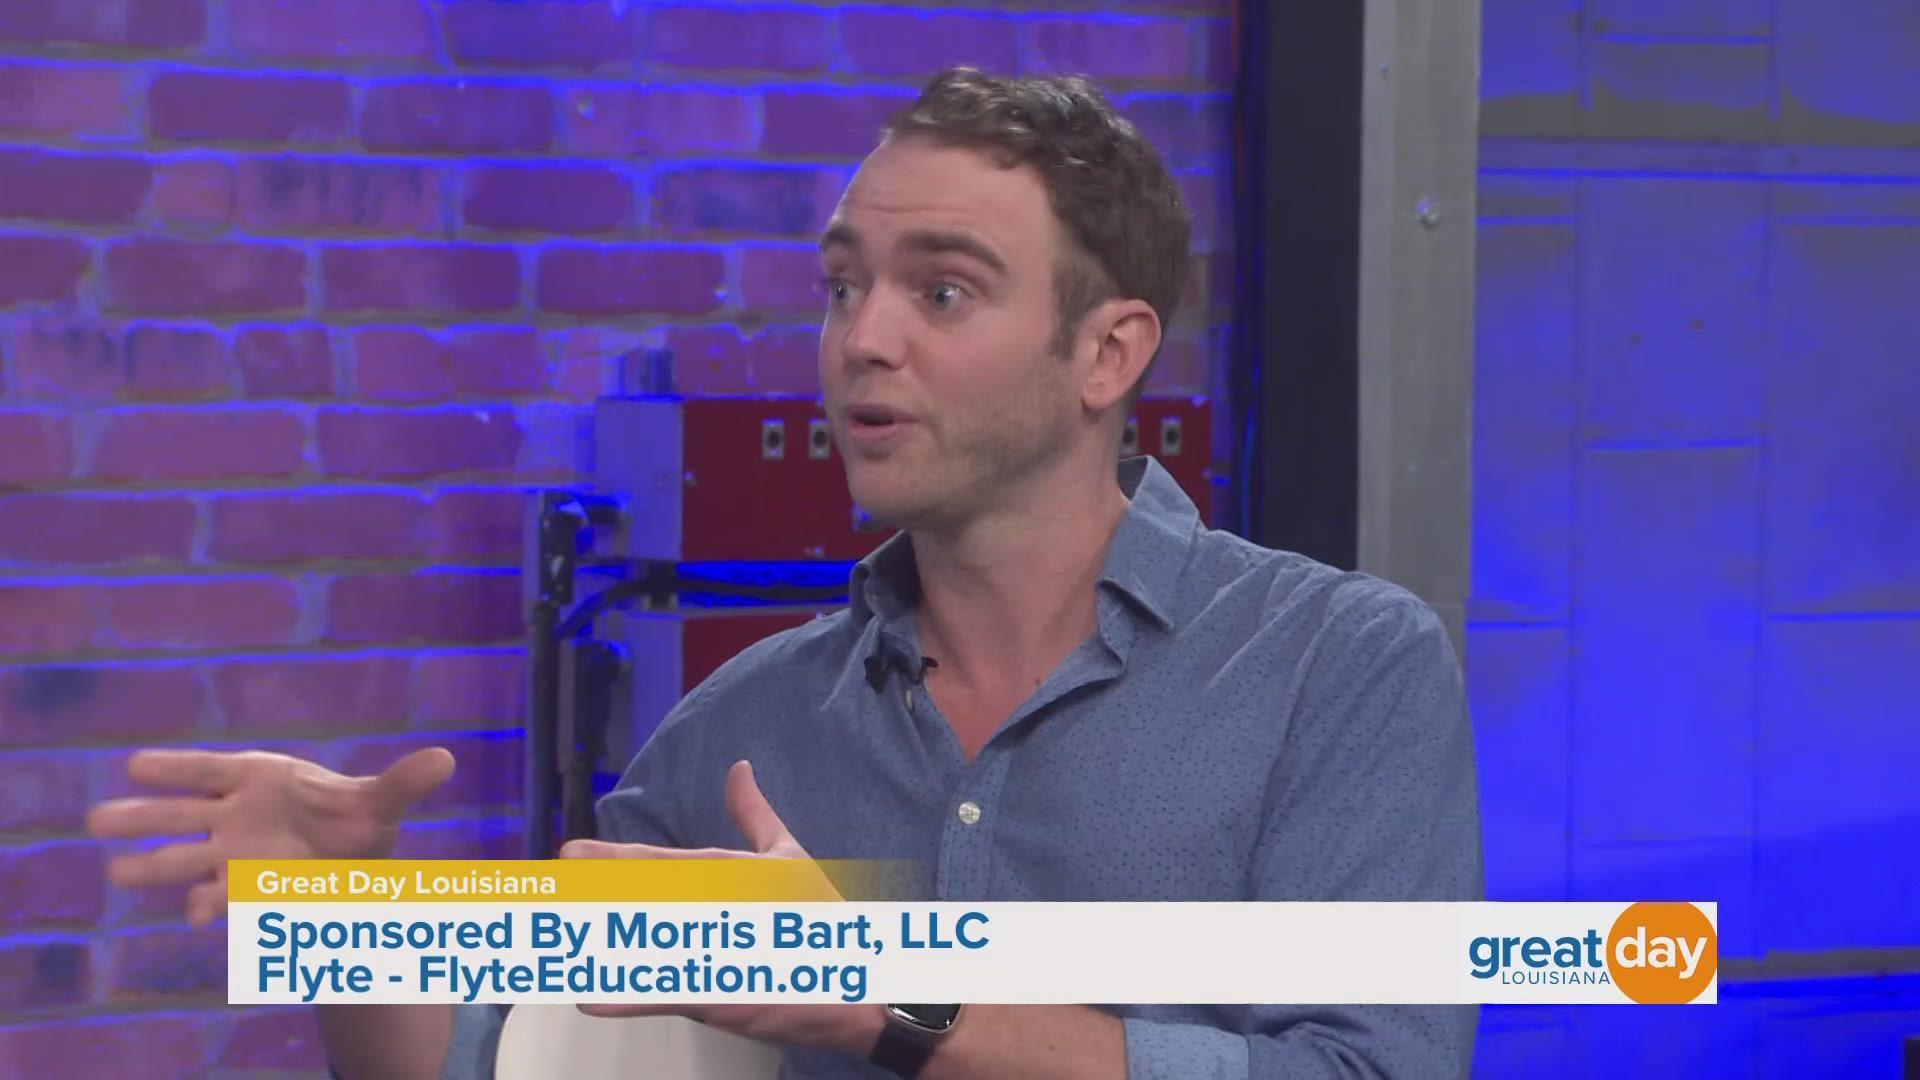 Morris Bart's Impact Give Back segment this month highlights FLYTE Education. Alexander Bigbie discusses their focus on financial education for small businesses.